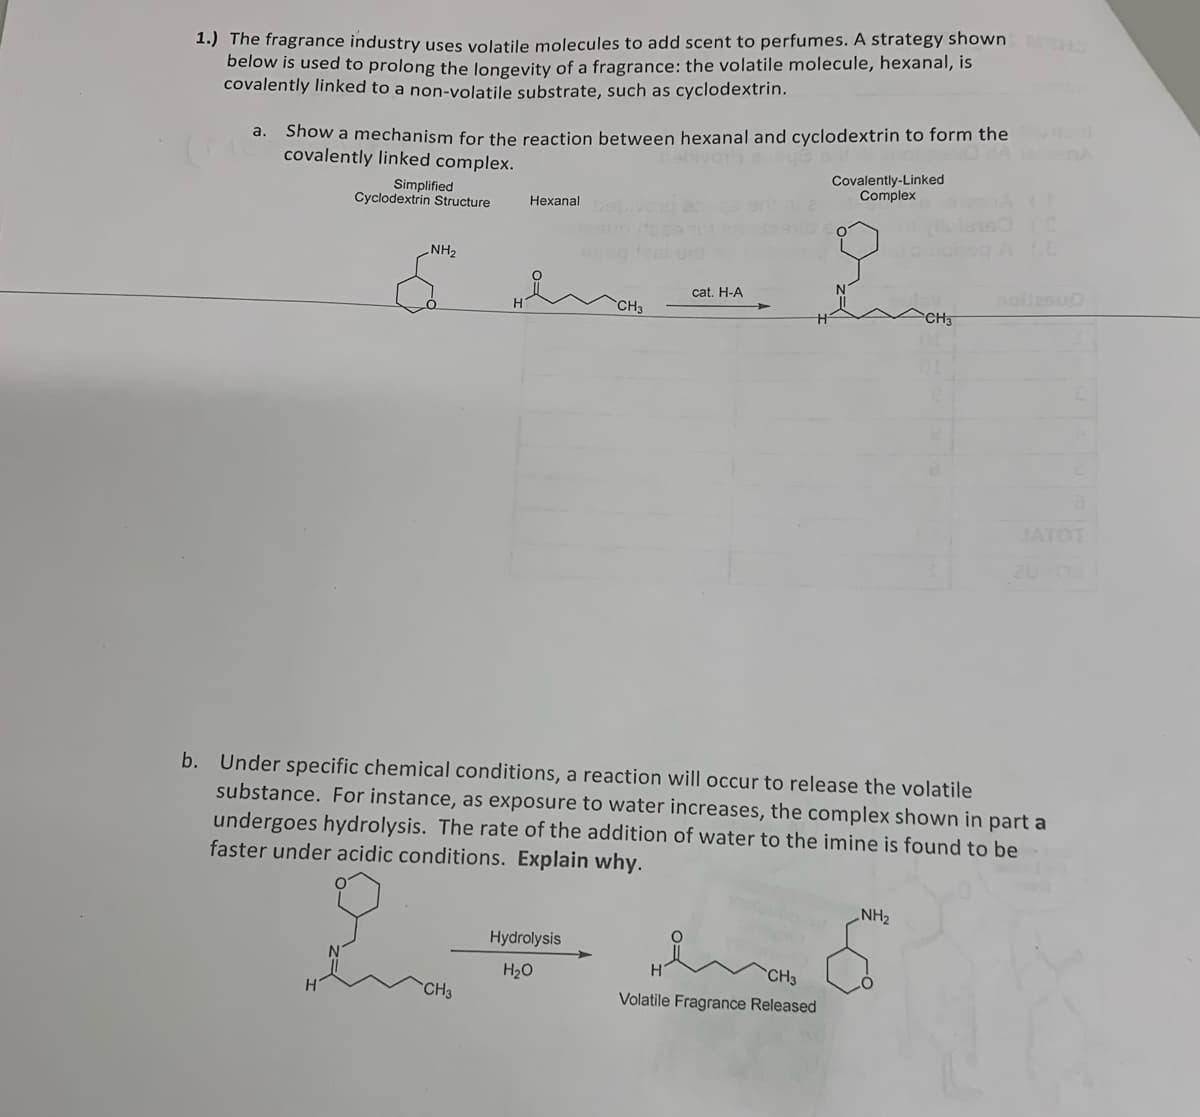 1.) The fragrance industry uses volatile molecules to add scent to perfumes. A strategy shown MOHO
below is used to prolong the longevity of a fragrance: the volatile molecule, hexanal, is
covalently linked to a non-volatile substrate, such as cyclodextrin.
a.
Show a mechanism for the reaction between hexanal and cyclodextrin to form the
covalently linked complex.
Simplified
Cyclodextrin Structure
NH₂
Hexanal
CH3
CH3
Hydrolysis
H₂O
cat. H-A
Covalently-Linked
Complex
b. Under specific chemical conditions, a reaction will occur to release the volatile
substance. For instance, as exposure to water increases, the complex shown in part a
undergoes hydrolysis. The rate of the addition of water to the imine is found to be
faster under acidic conditions. Explain why.
HenCHO
CH3
Volatile Fragrance Released
CH3
NH₂
(E